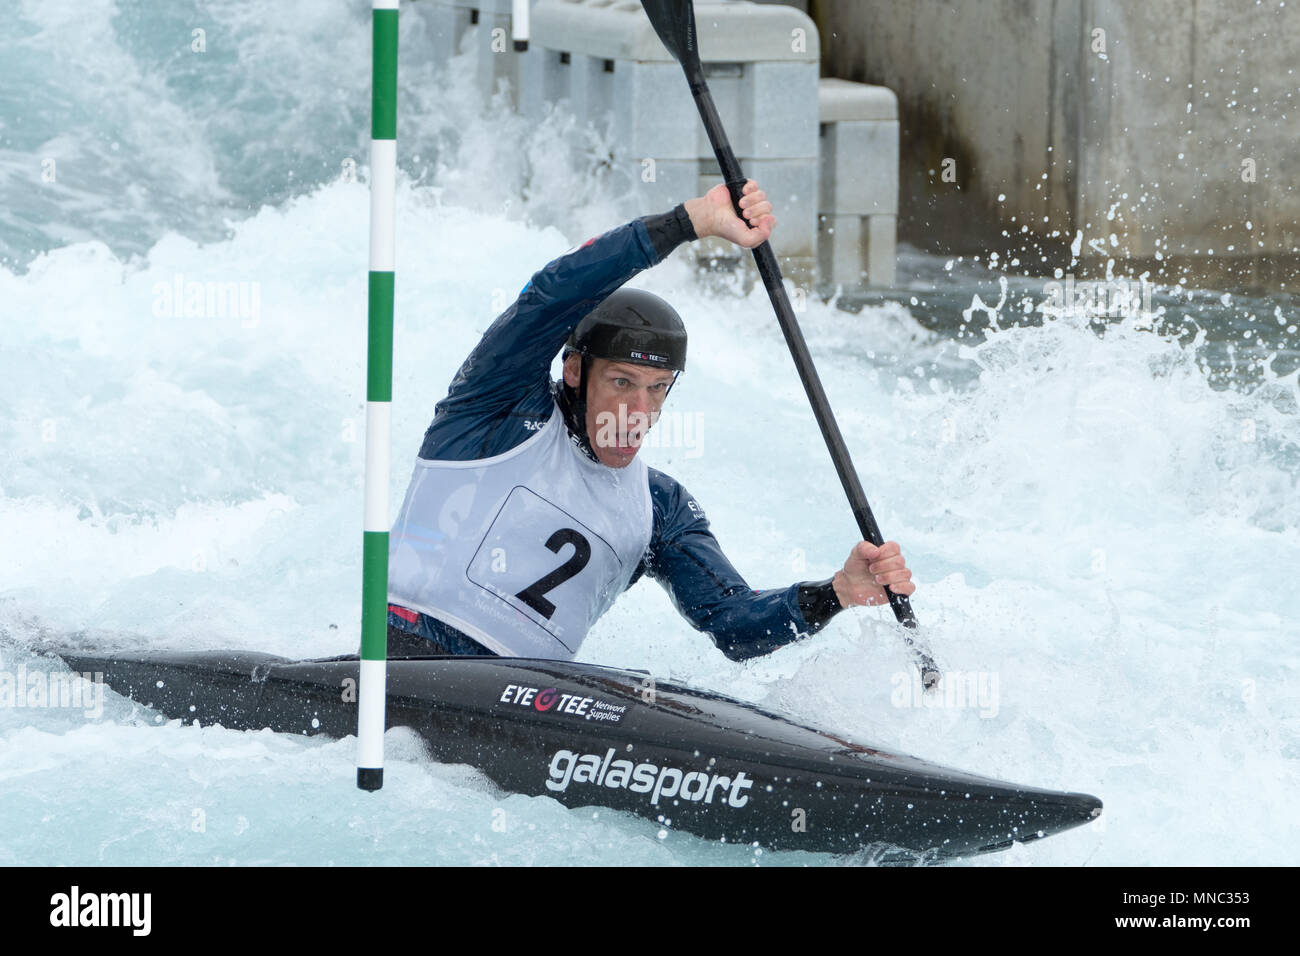 Day 1 of the British canoeing selection taking place at Lee Valley White Water Centre in Waltham Cross, UK. Stock Photo